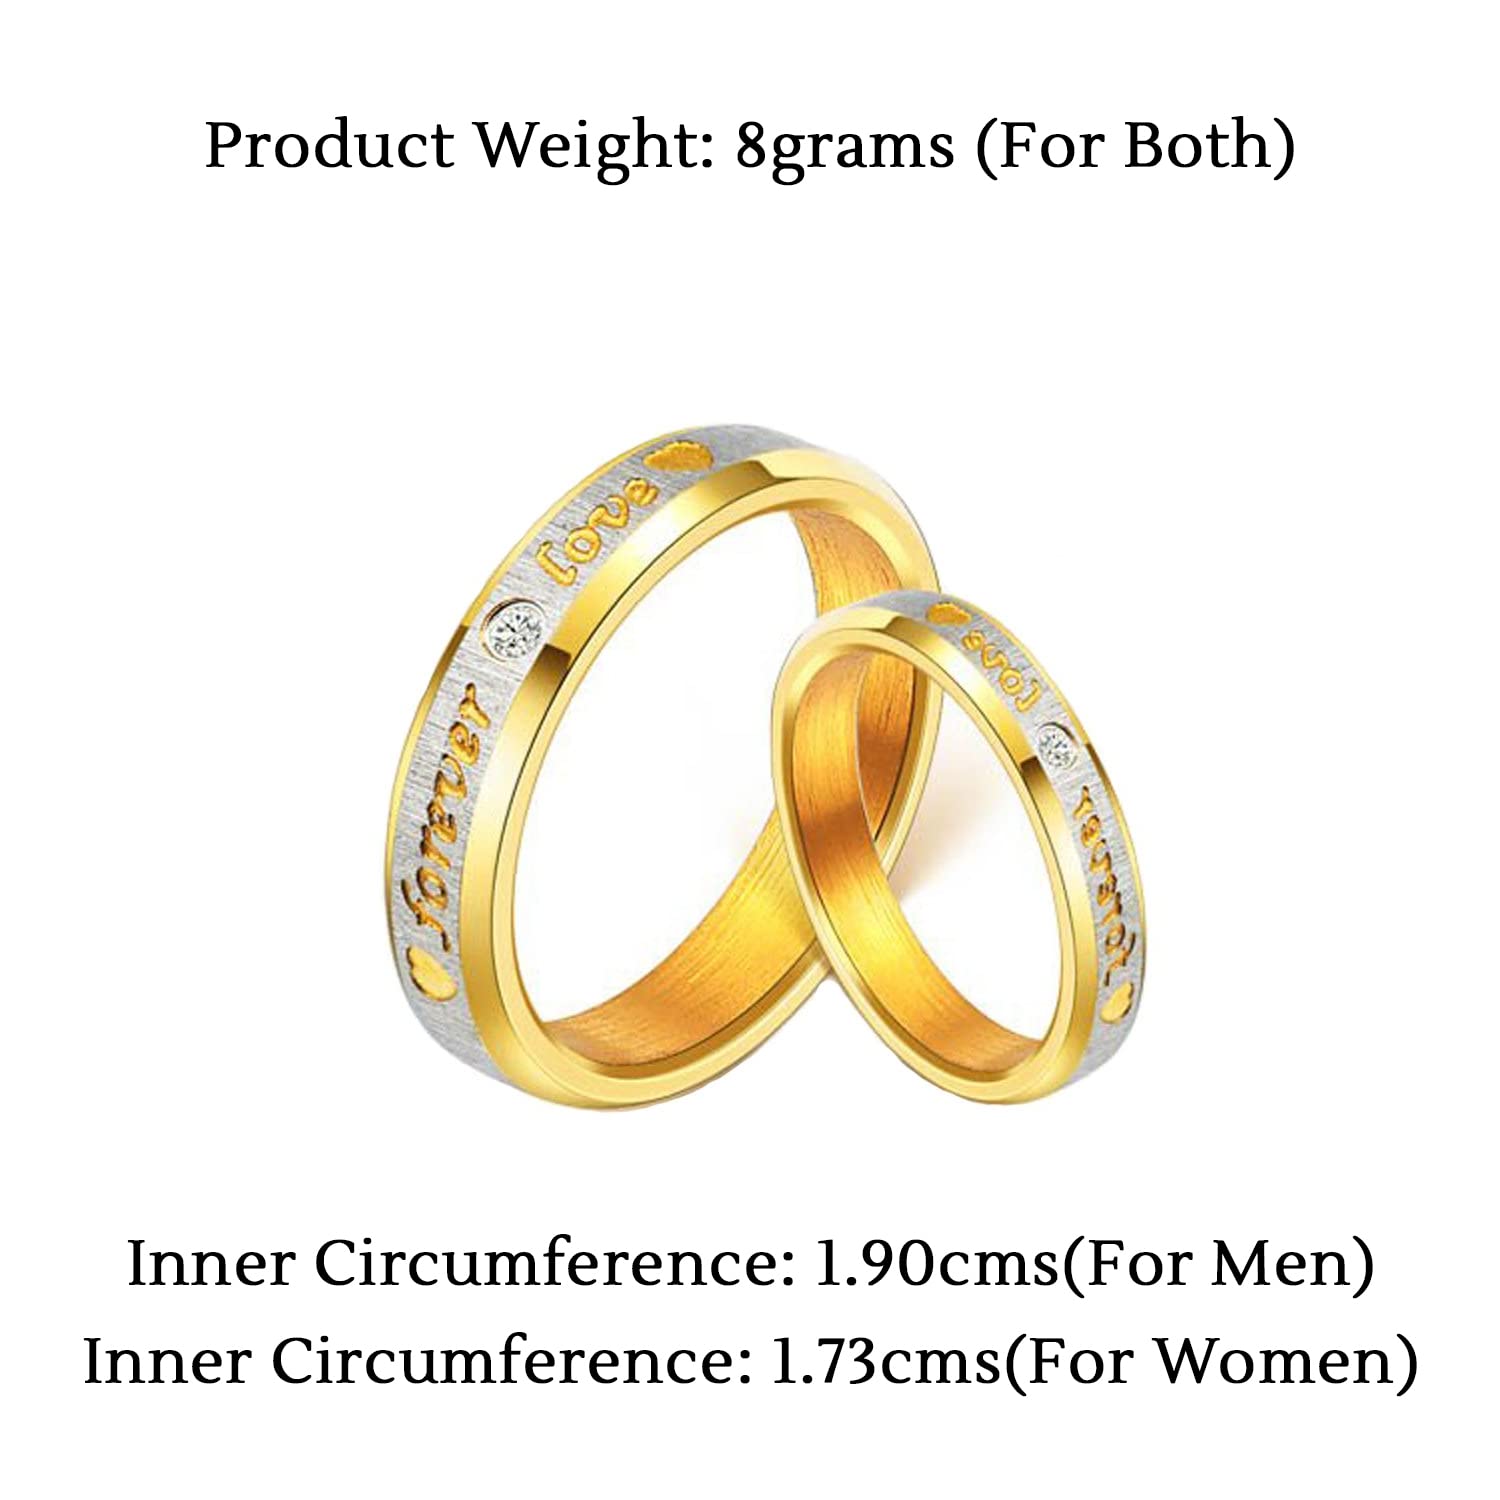 Platinum Rings for Men & Women at Best Price at Candere by Kalyan Jewellers.